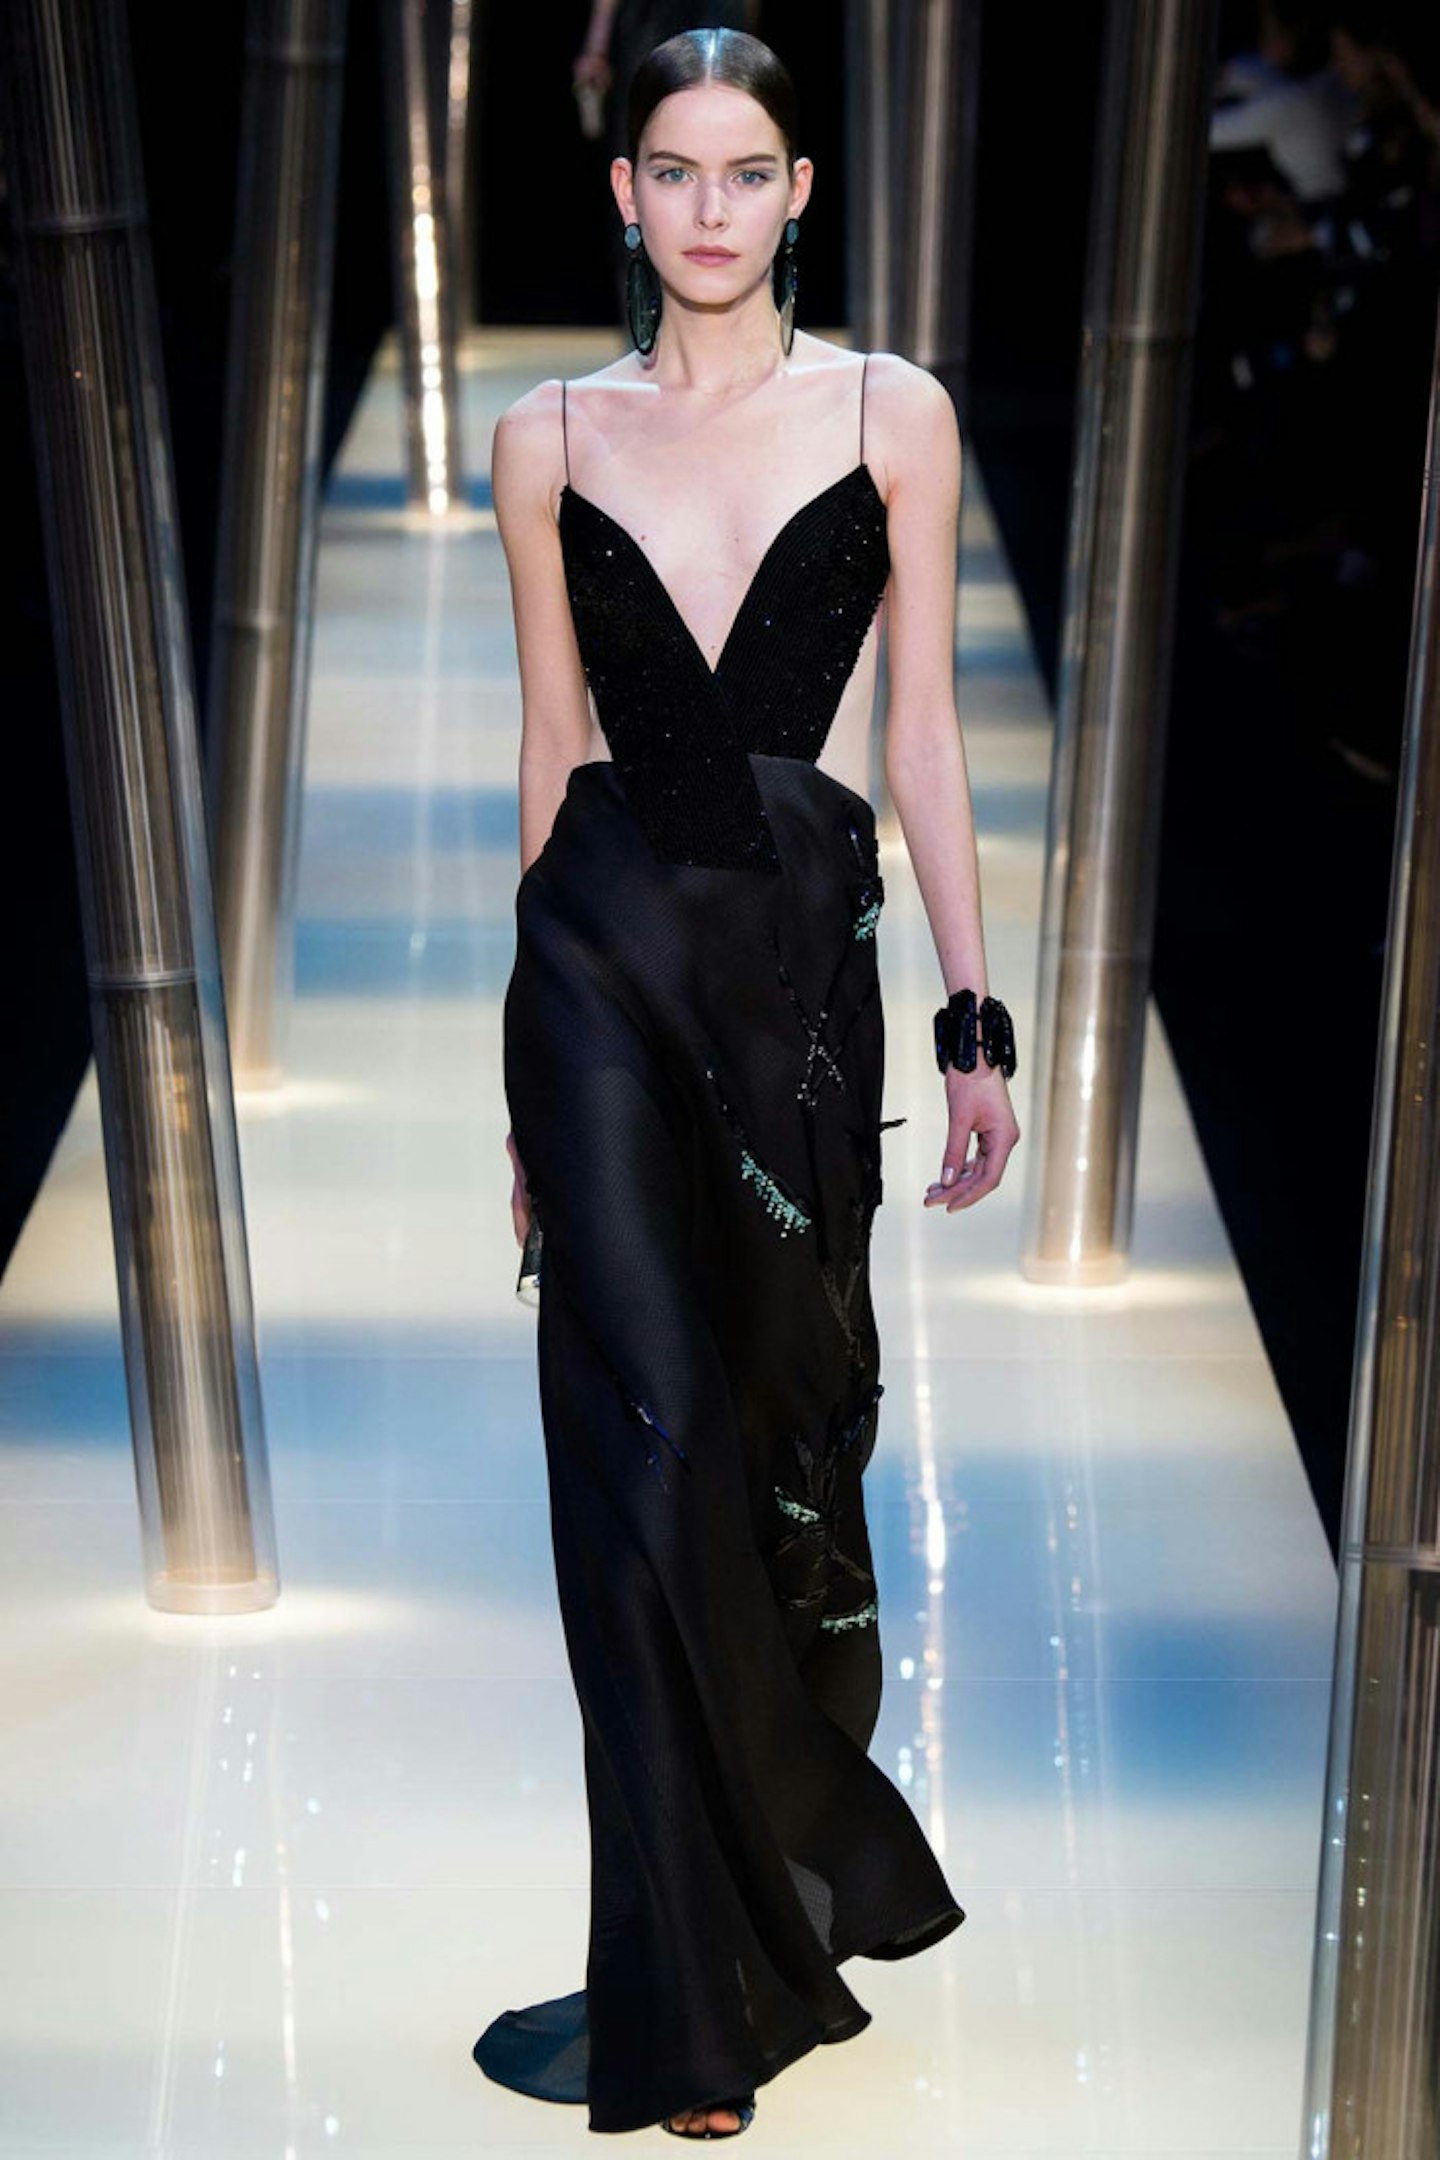 This ace Armani number would be THE DREAM!